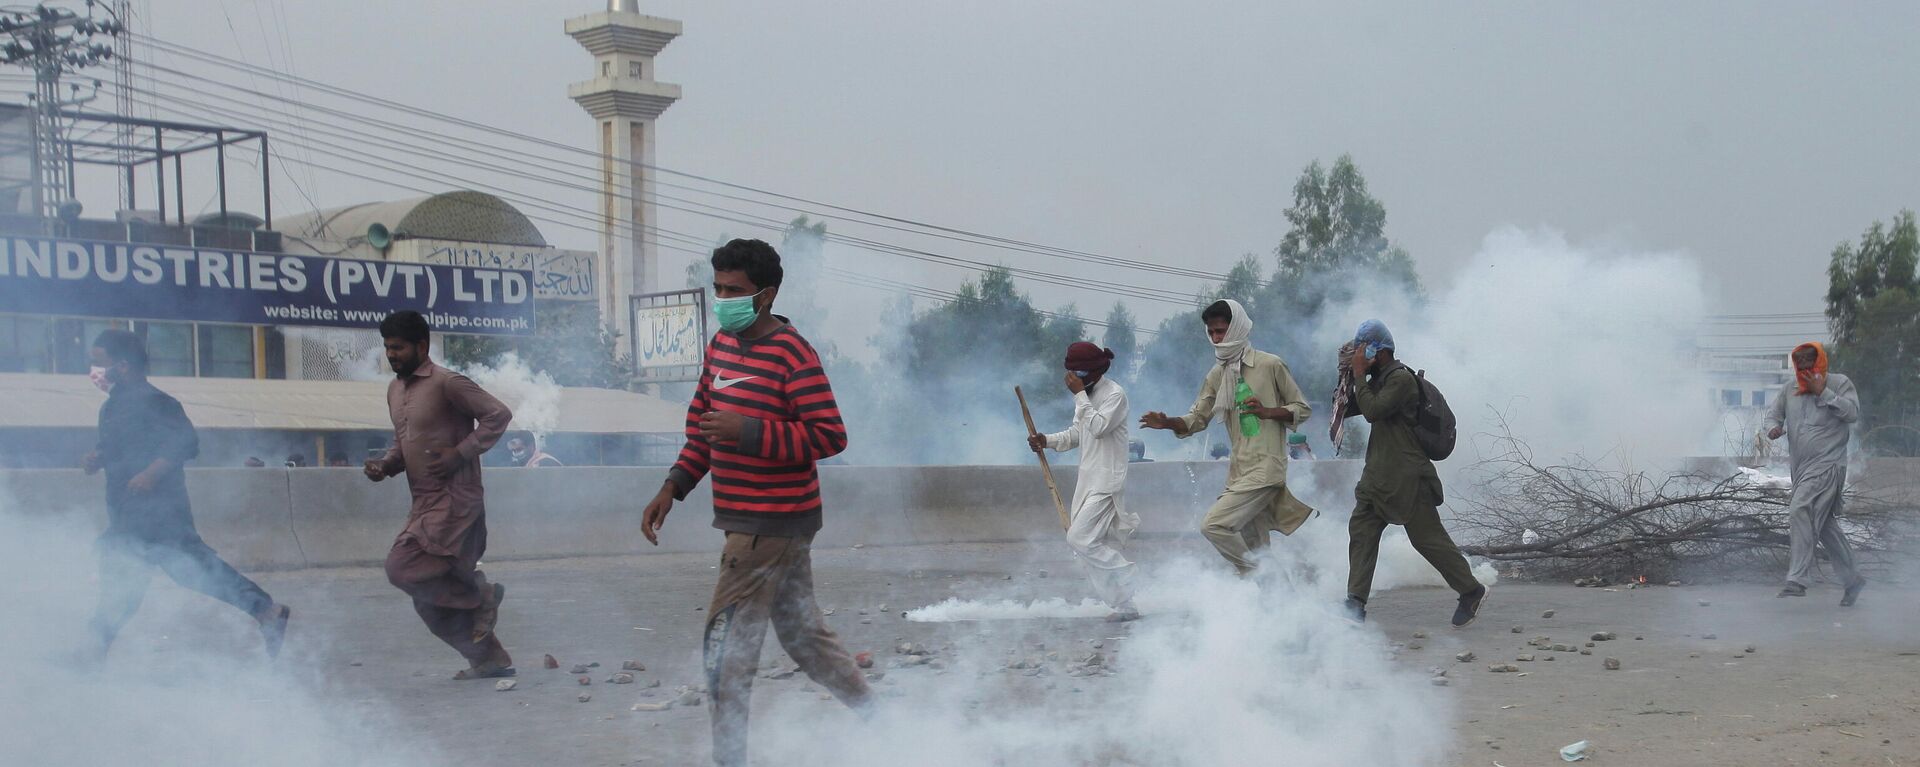 Supporters of the banned Islamist political party Tehrik-e-Labaik Pakistan (TLP) run amid the smoke of tear gas during a protest demanding the release of their leader and the expulsion of the French ambassador over cartoons depicting the Prophet Mohammed, in Lahore, Pakistan, October 23, 2021 - Sputnik International, 1920, 28.10.2021